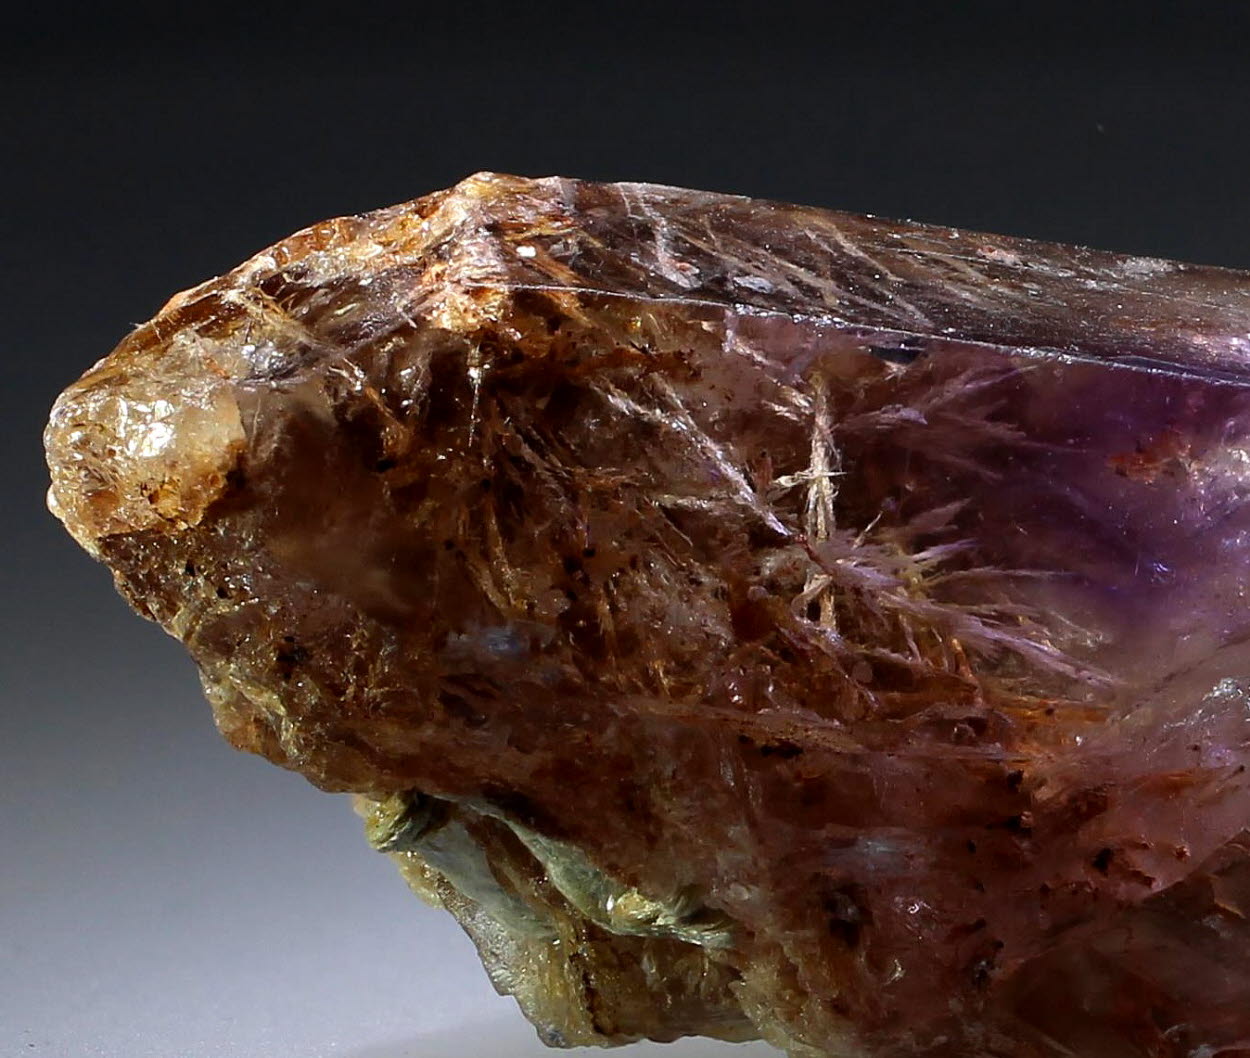 Amethyst With Laumontite Inclusions